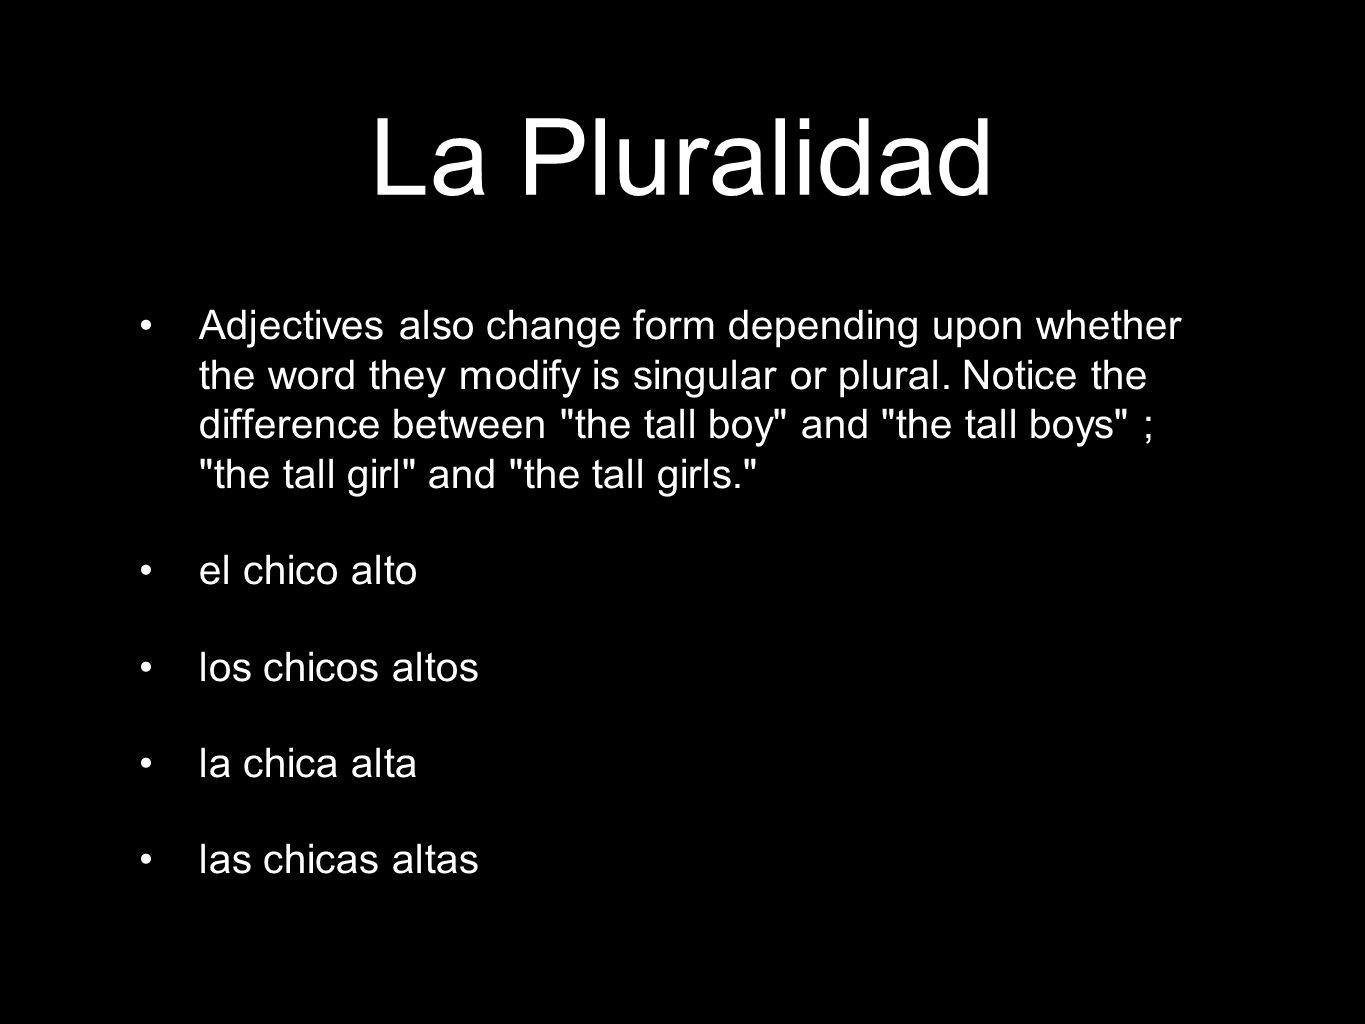 La Pluralidad Adjectives also change form depending upon whether the word they modify is singular or plural.